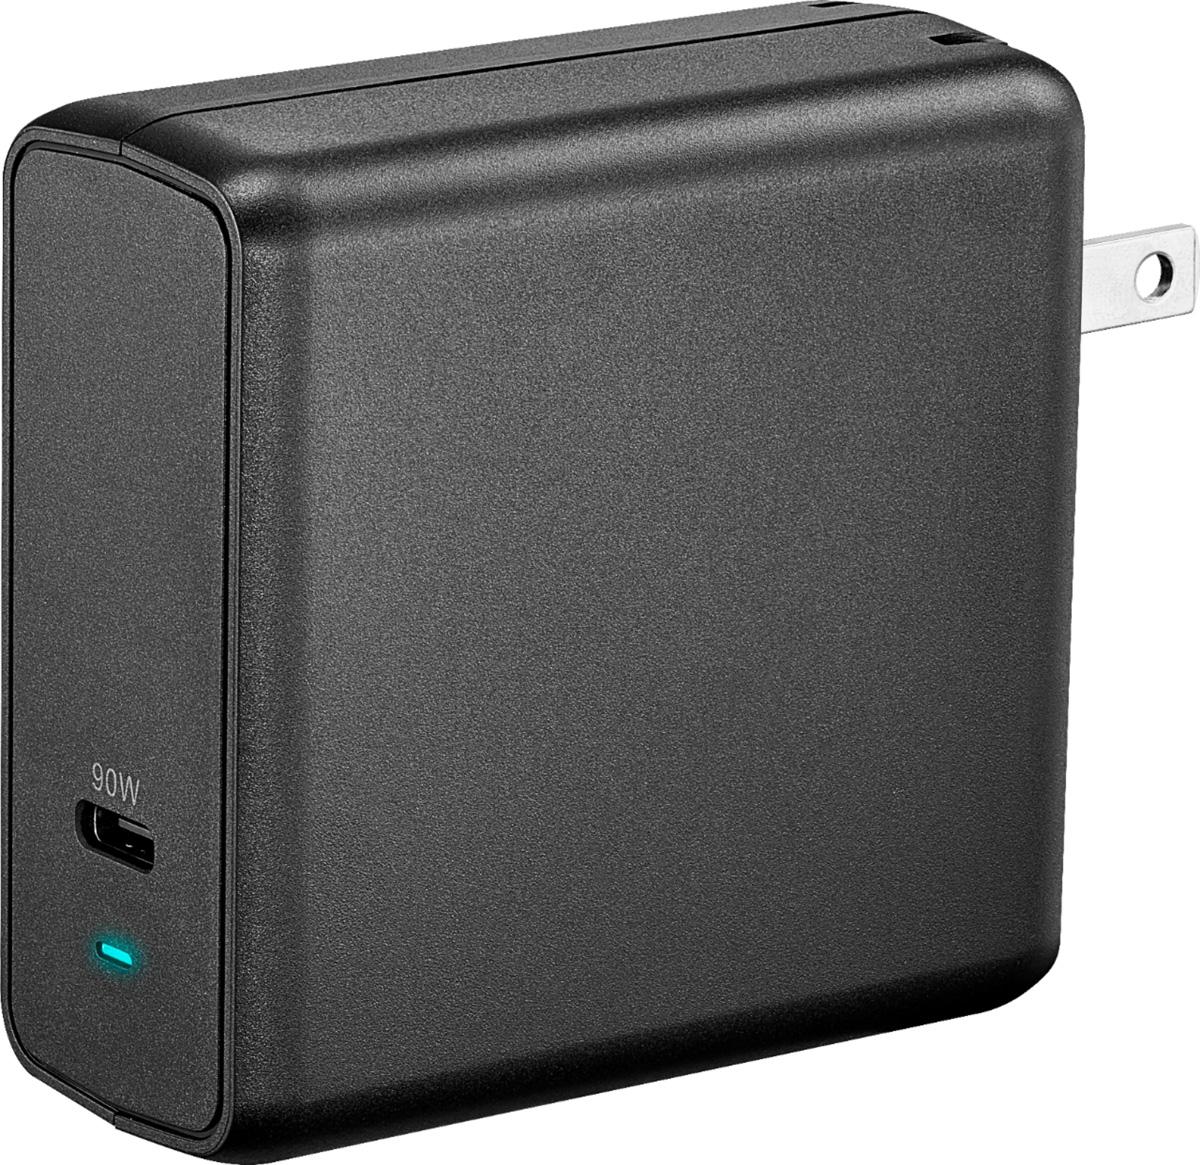 Insignia 90W USB-C Fast Charging Wall Charger for $10.99